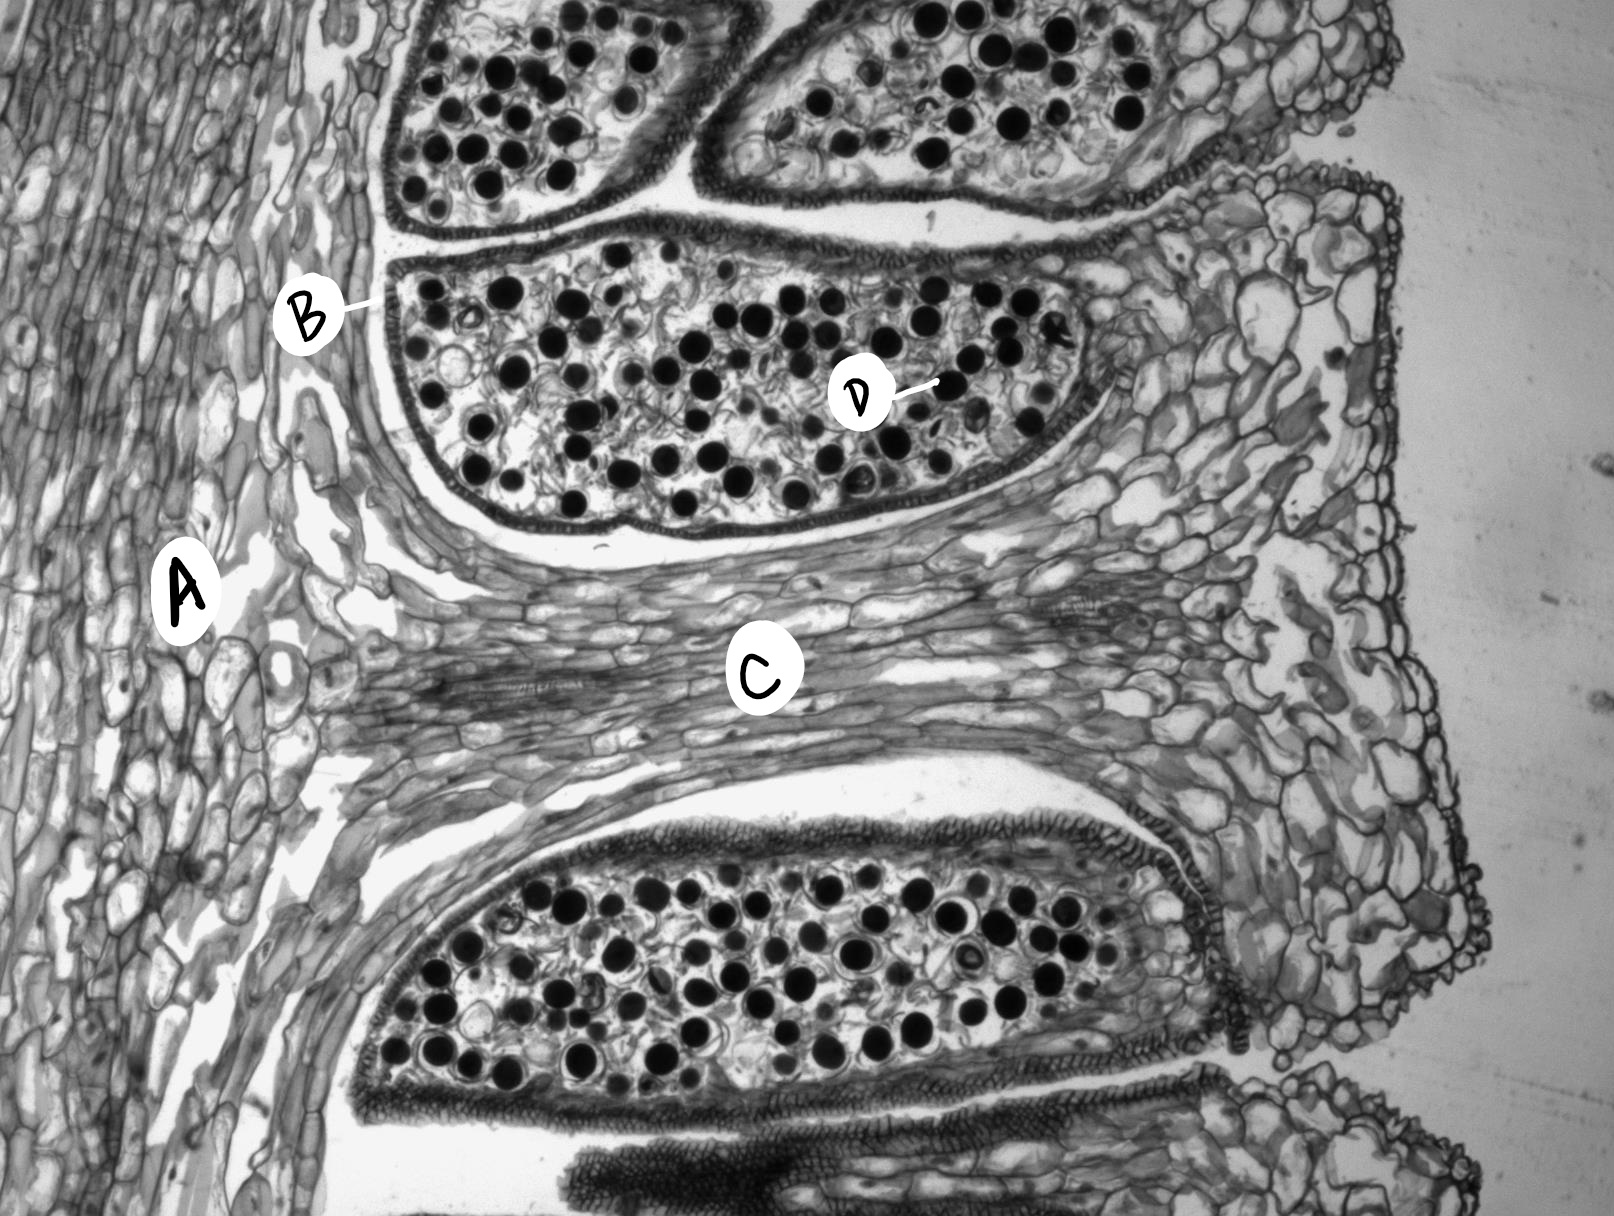 A long section through a single sporangiophore. All of the spores in the sporangia are about the same size